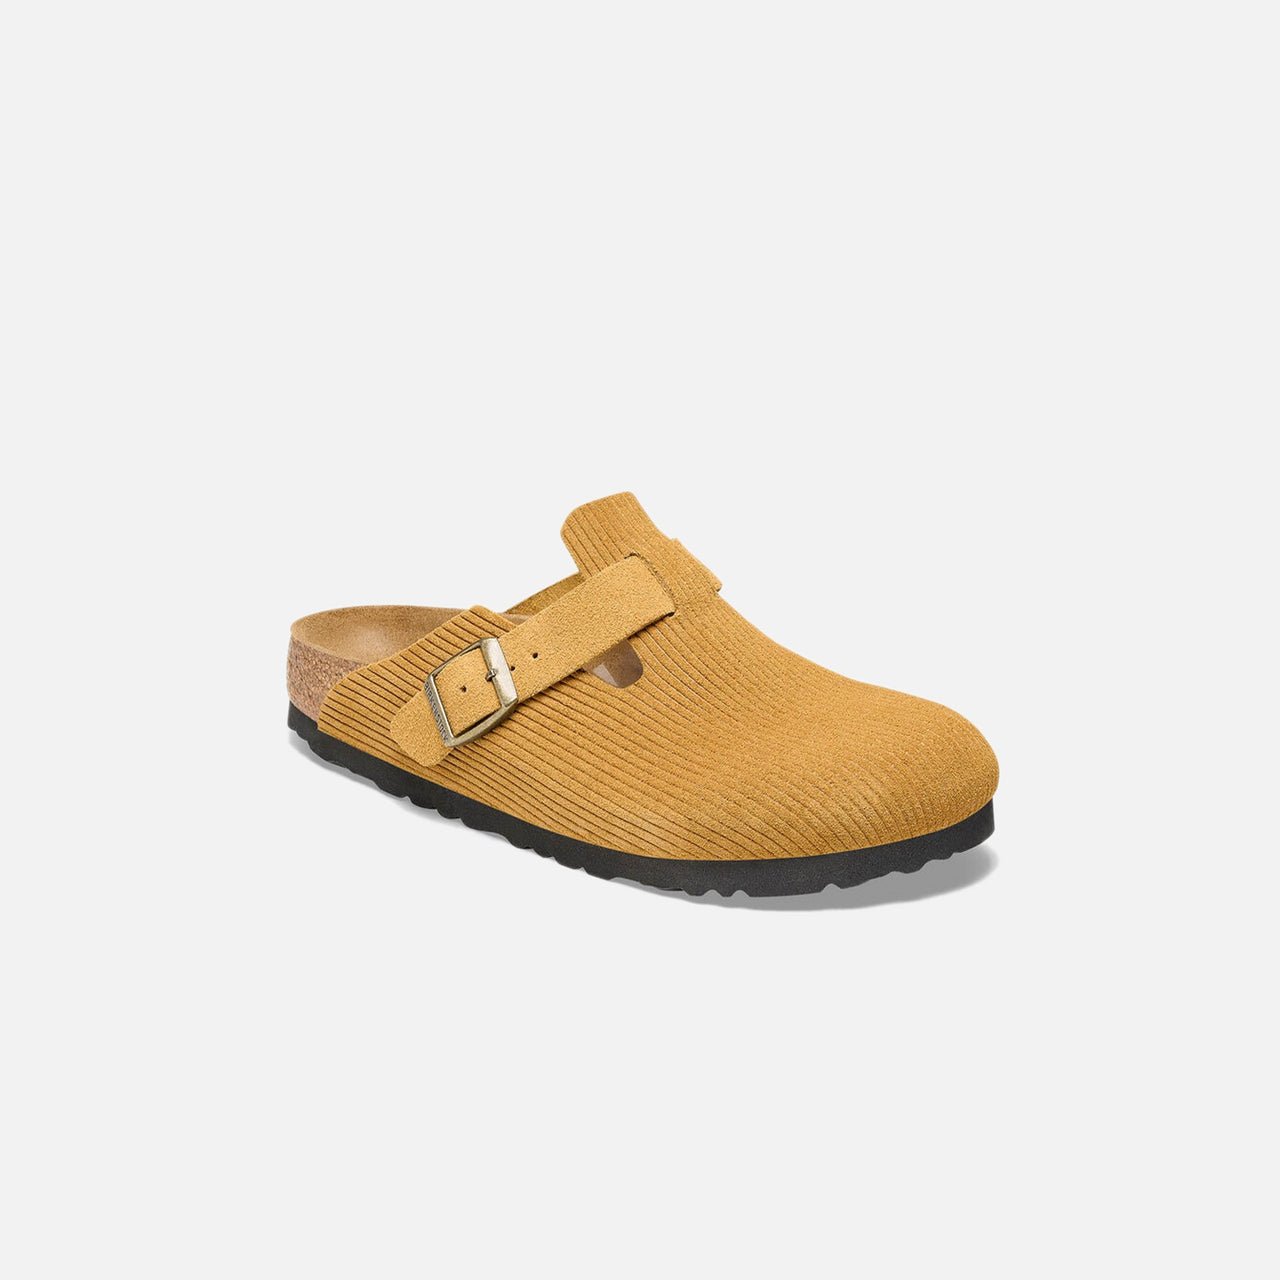 Brown Birkenstock Boston clogs featuring a soft and durable corduroy upper